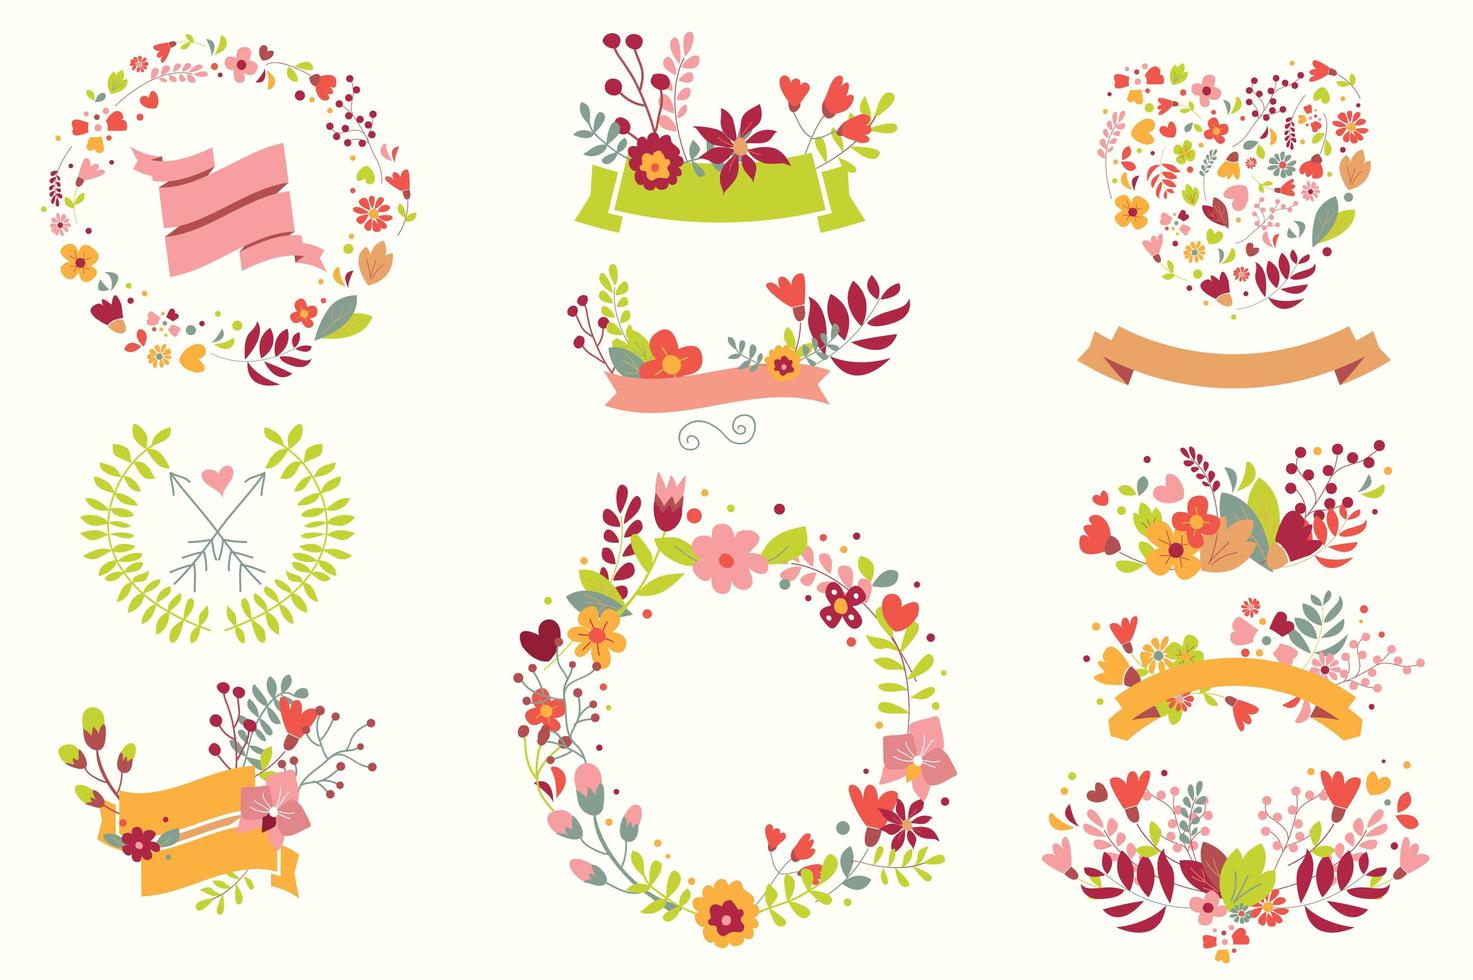 Hand drawn vintage flowers and floral elements for weddings, Valentines day, birthdays and holidays vector